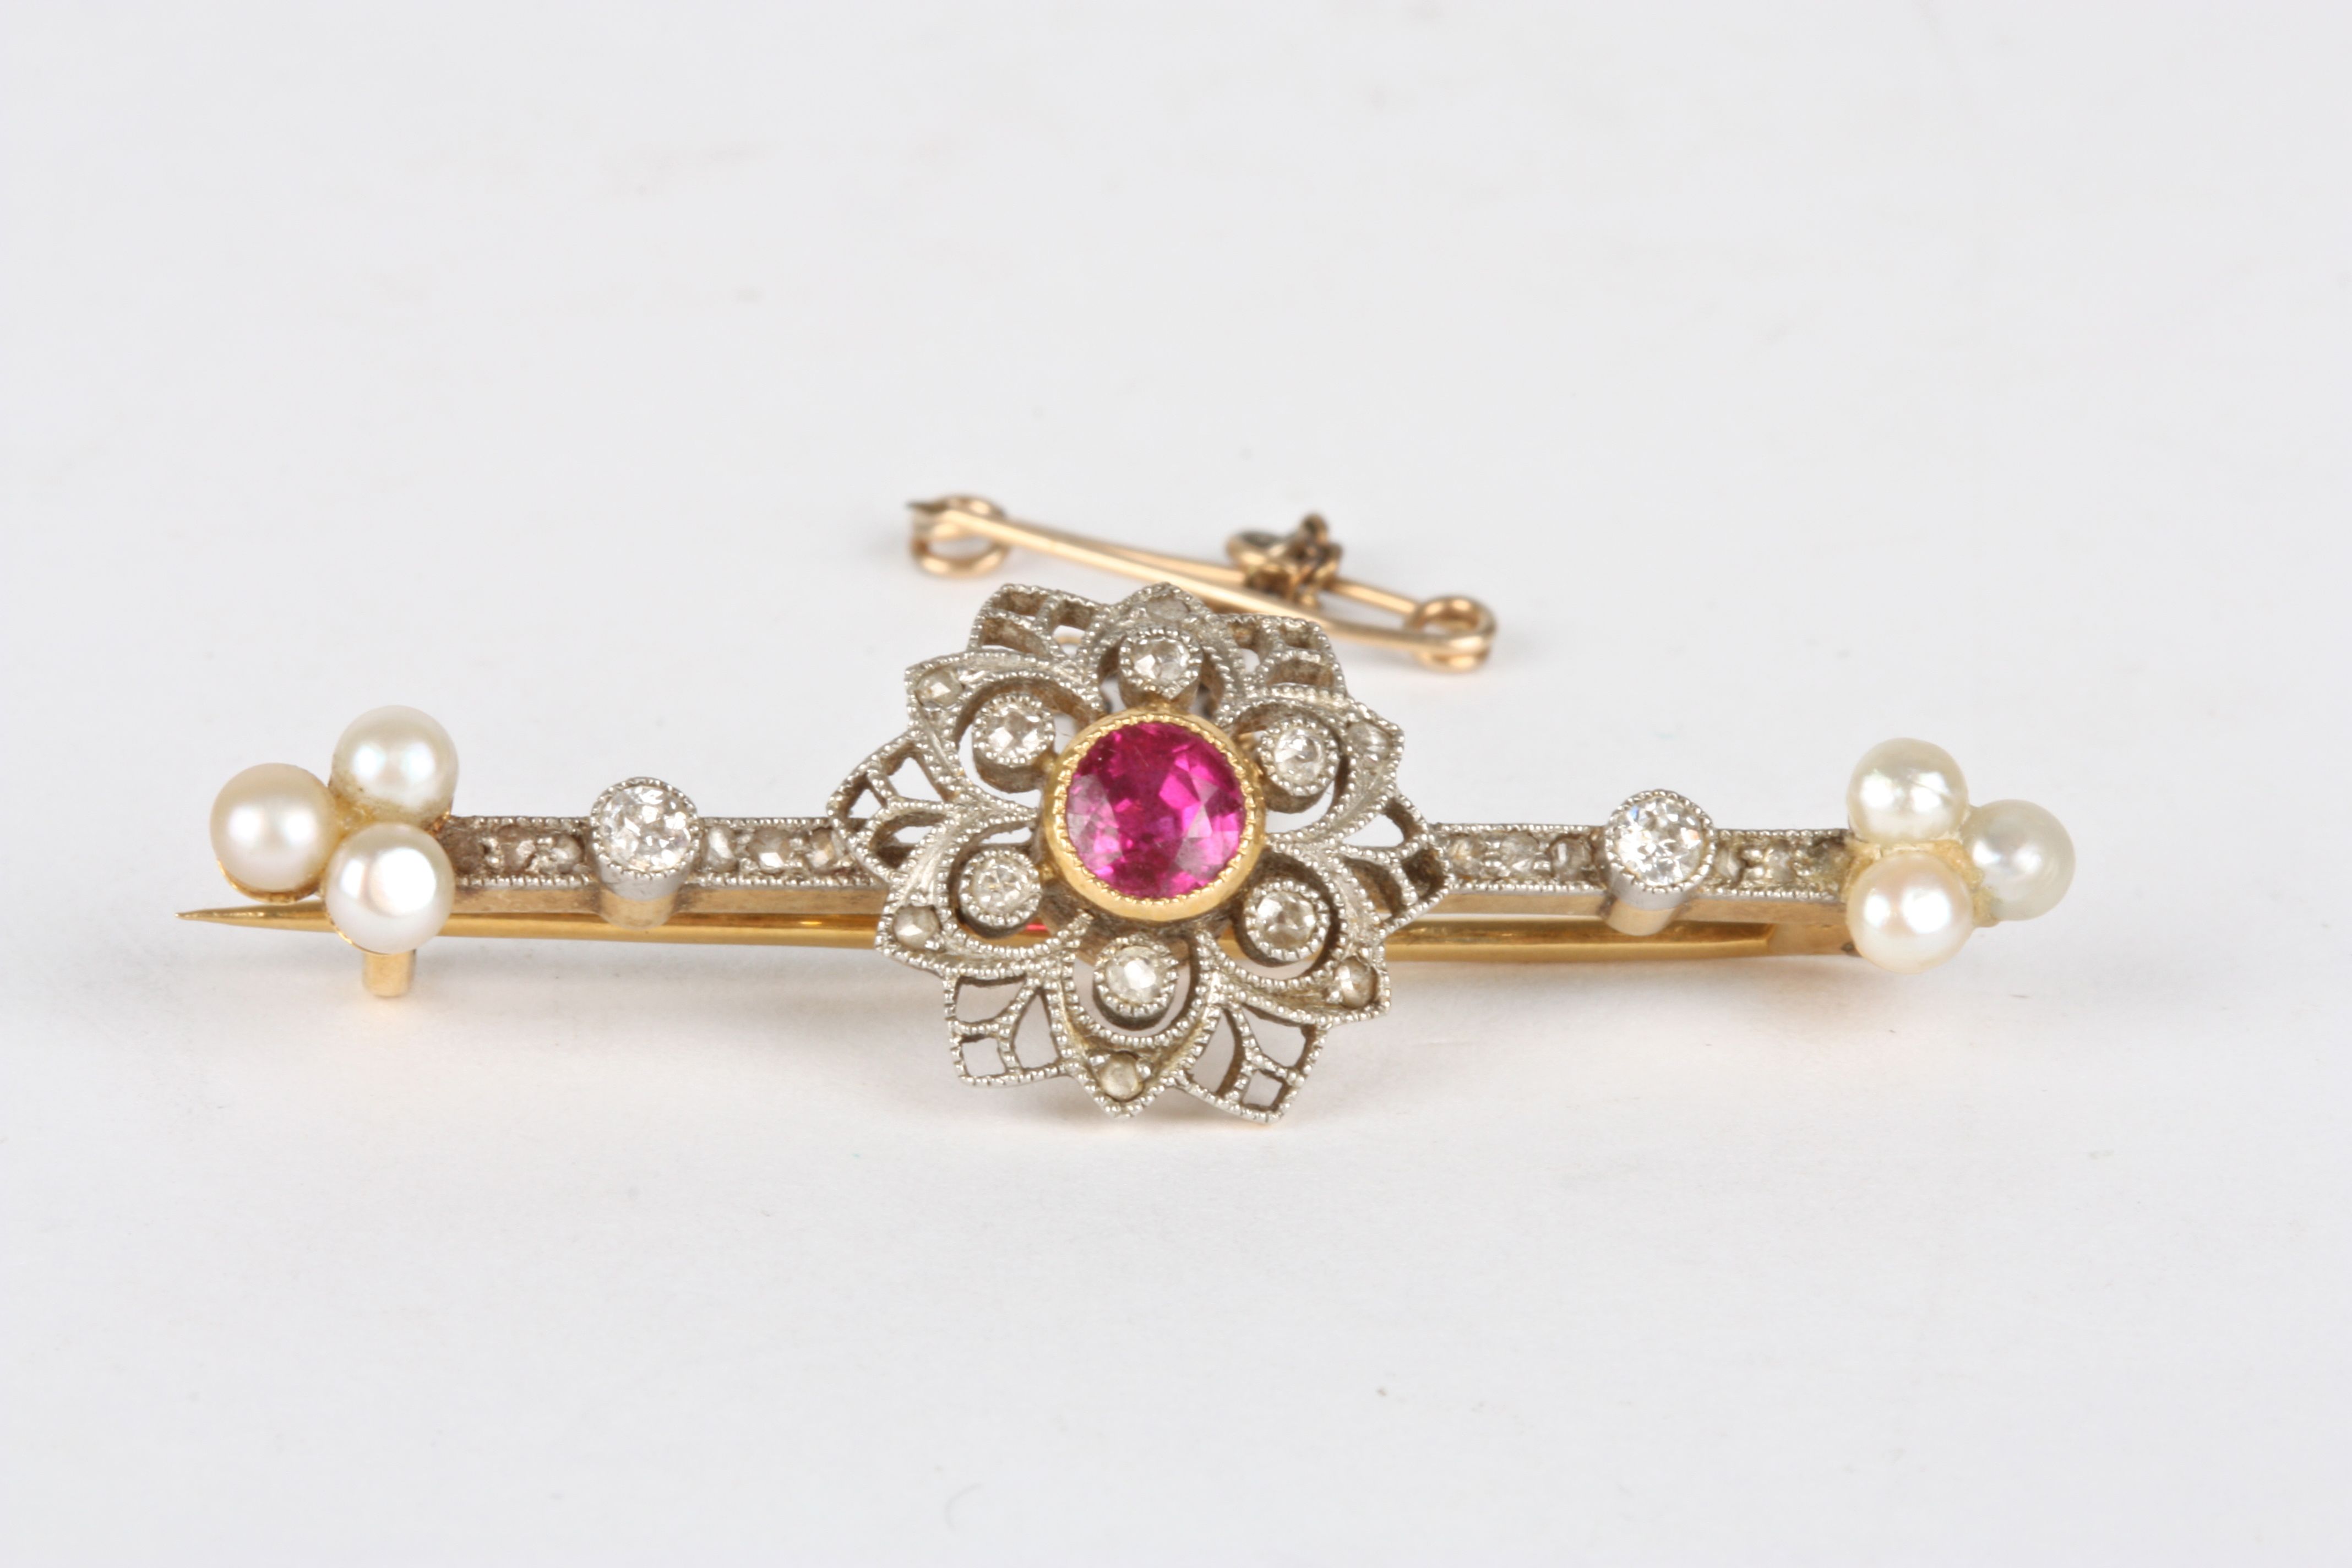 A Victorian diamond, ruby and seed pearl bar brooch
set with a central ruby surrounded by small